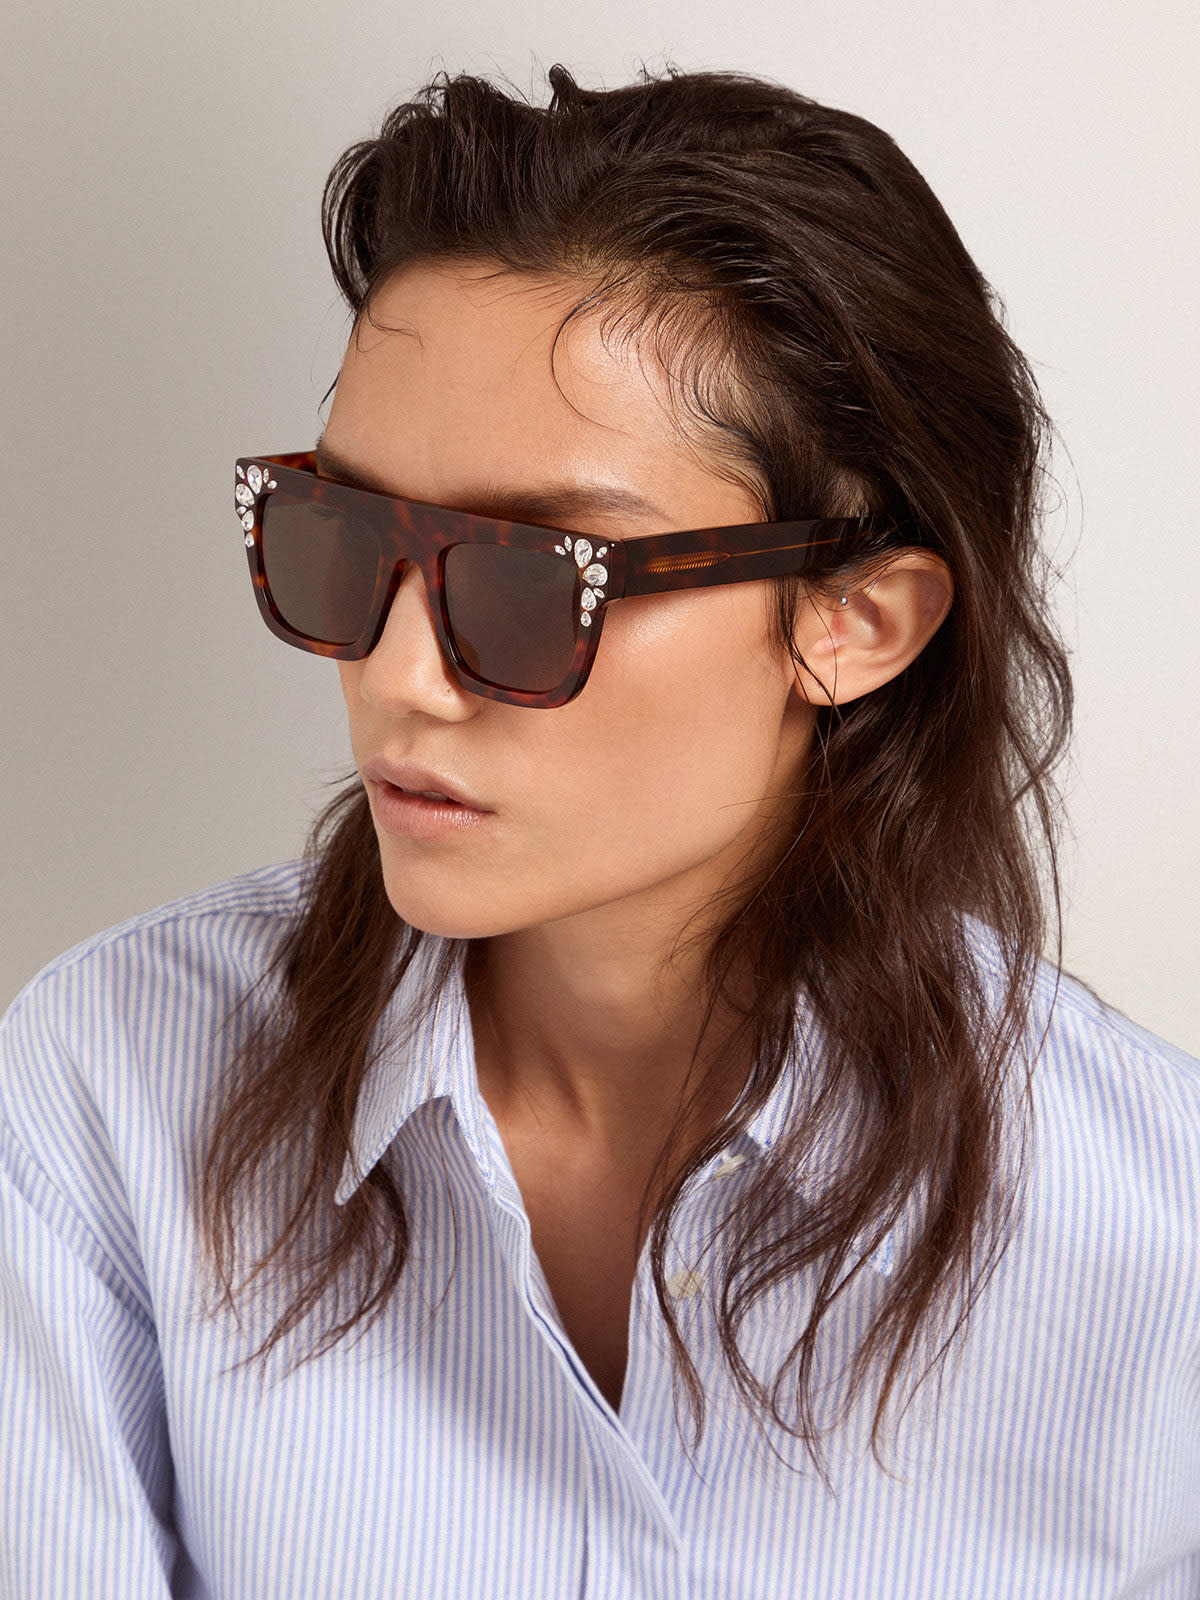 Golden Goose - Square-style Sunframe Jamie with Havana brown frame and teardrop crystals in 